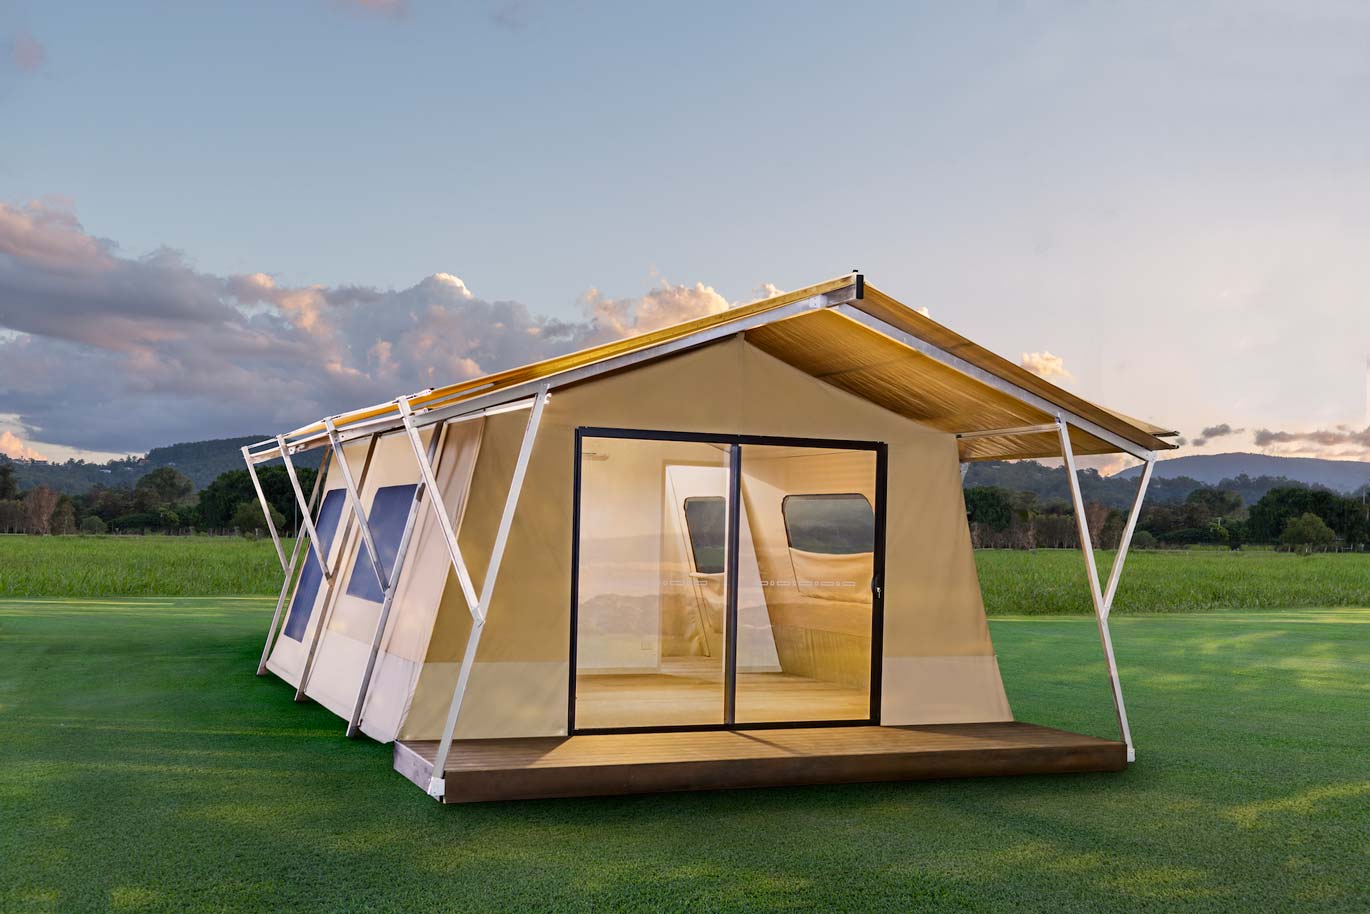 Introducing the new Eco Tent ‘Daintree’ model